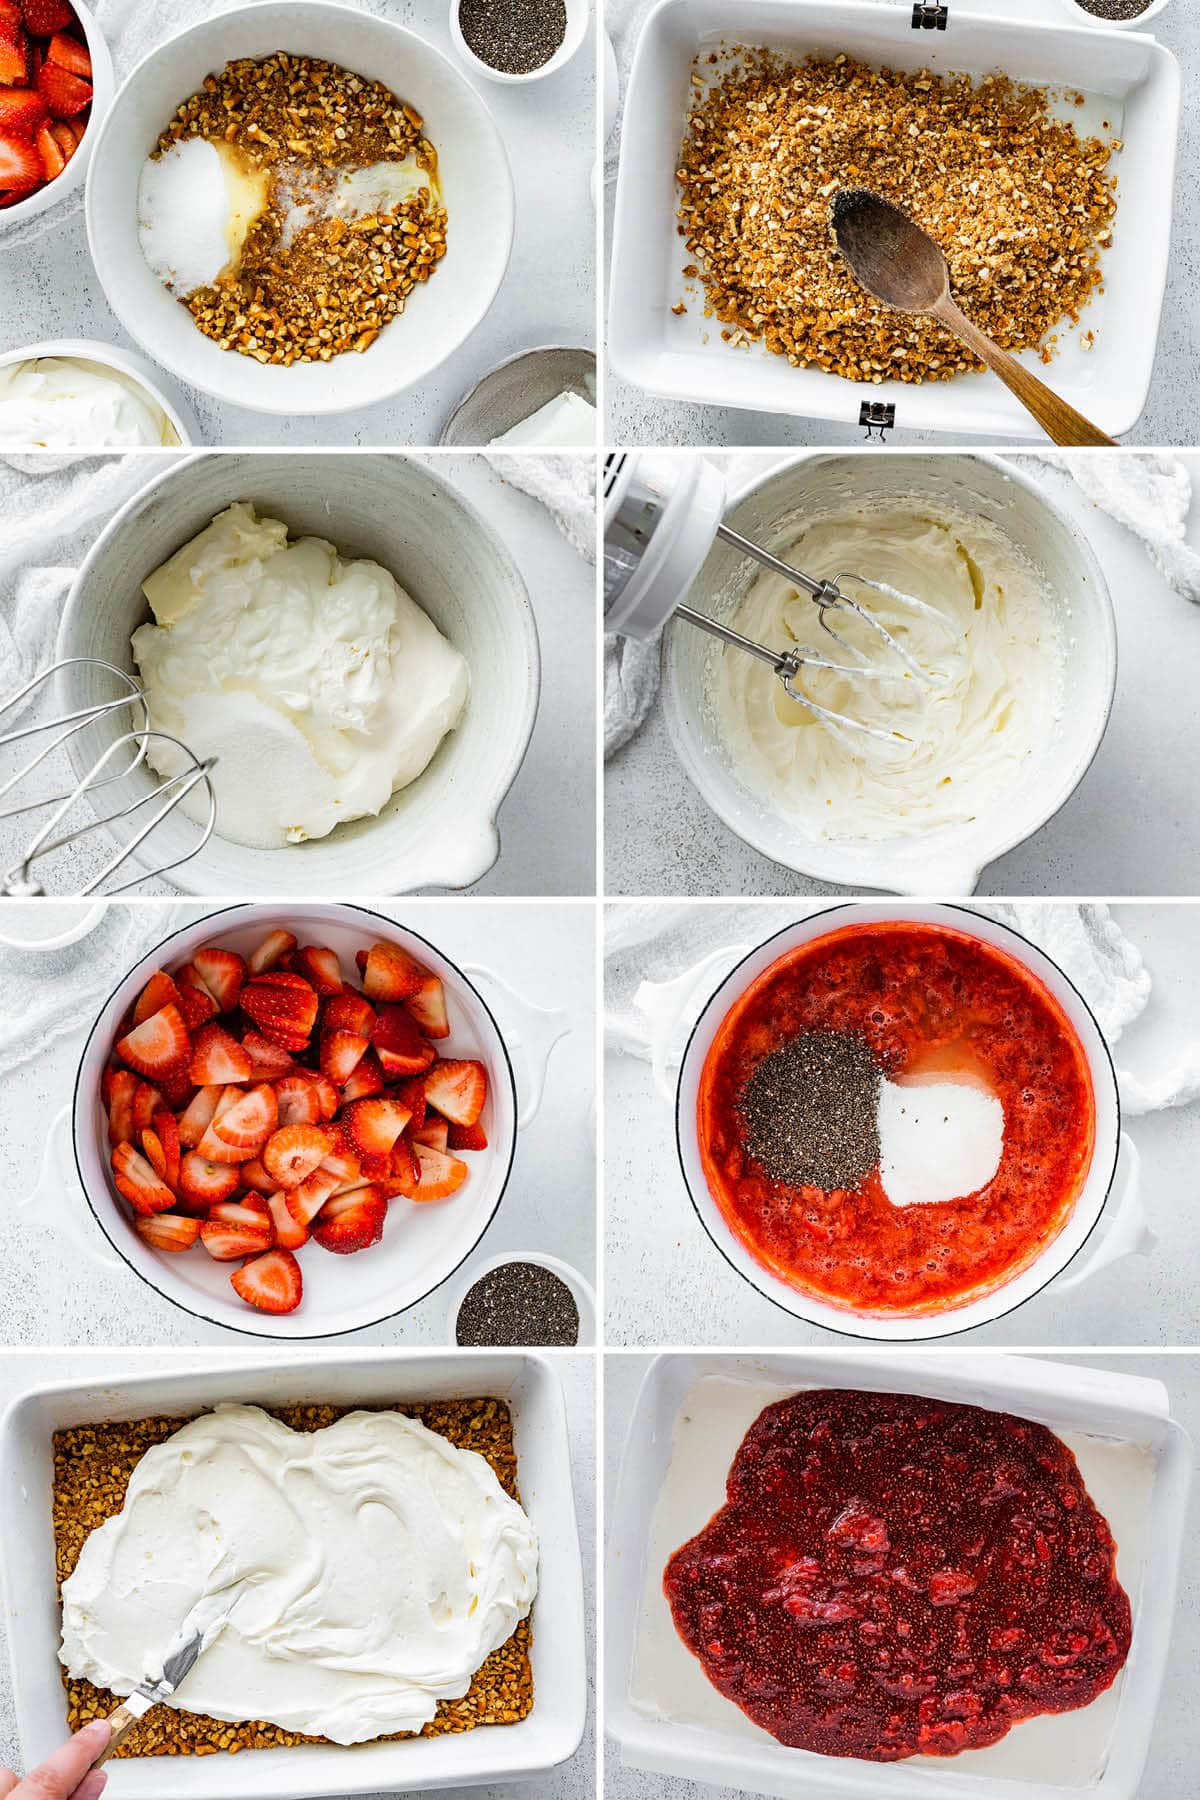 8 photos showing the steps to make Healthy Strawberry Pretzel Salad: making pretzel crush, adding cream layer, making strawberry chia jam and layering on top.